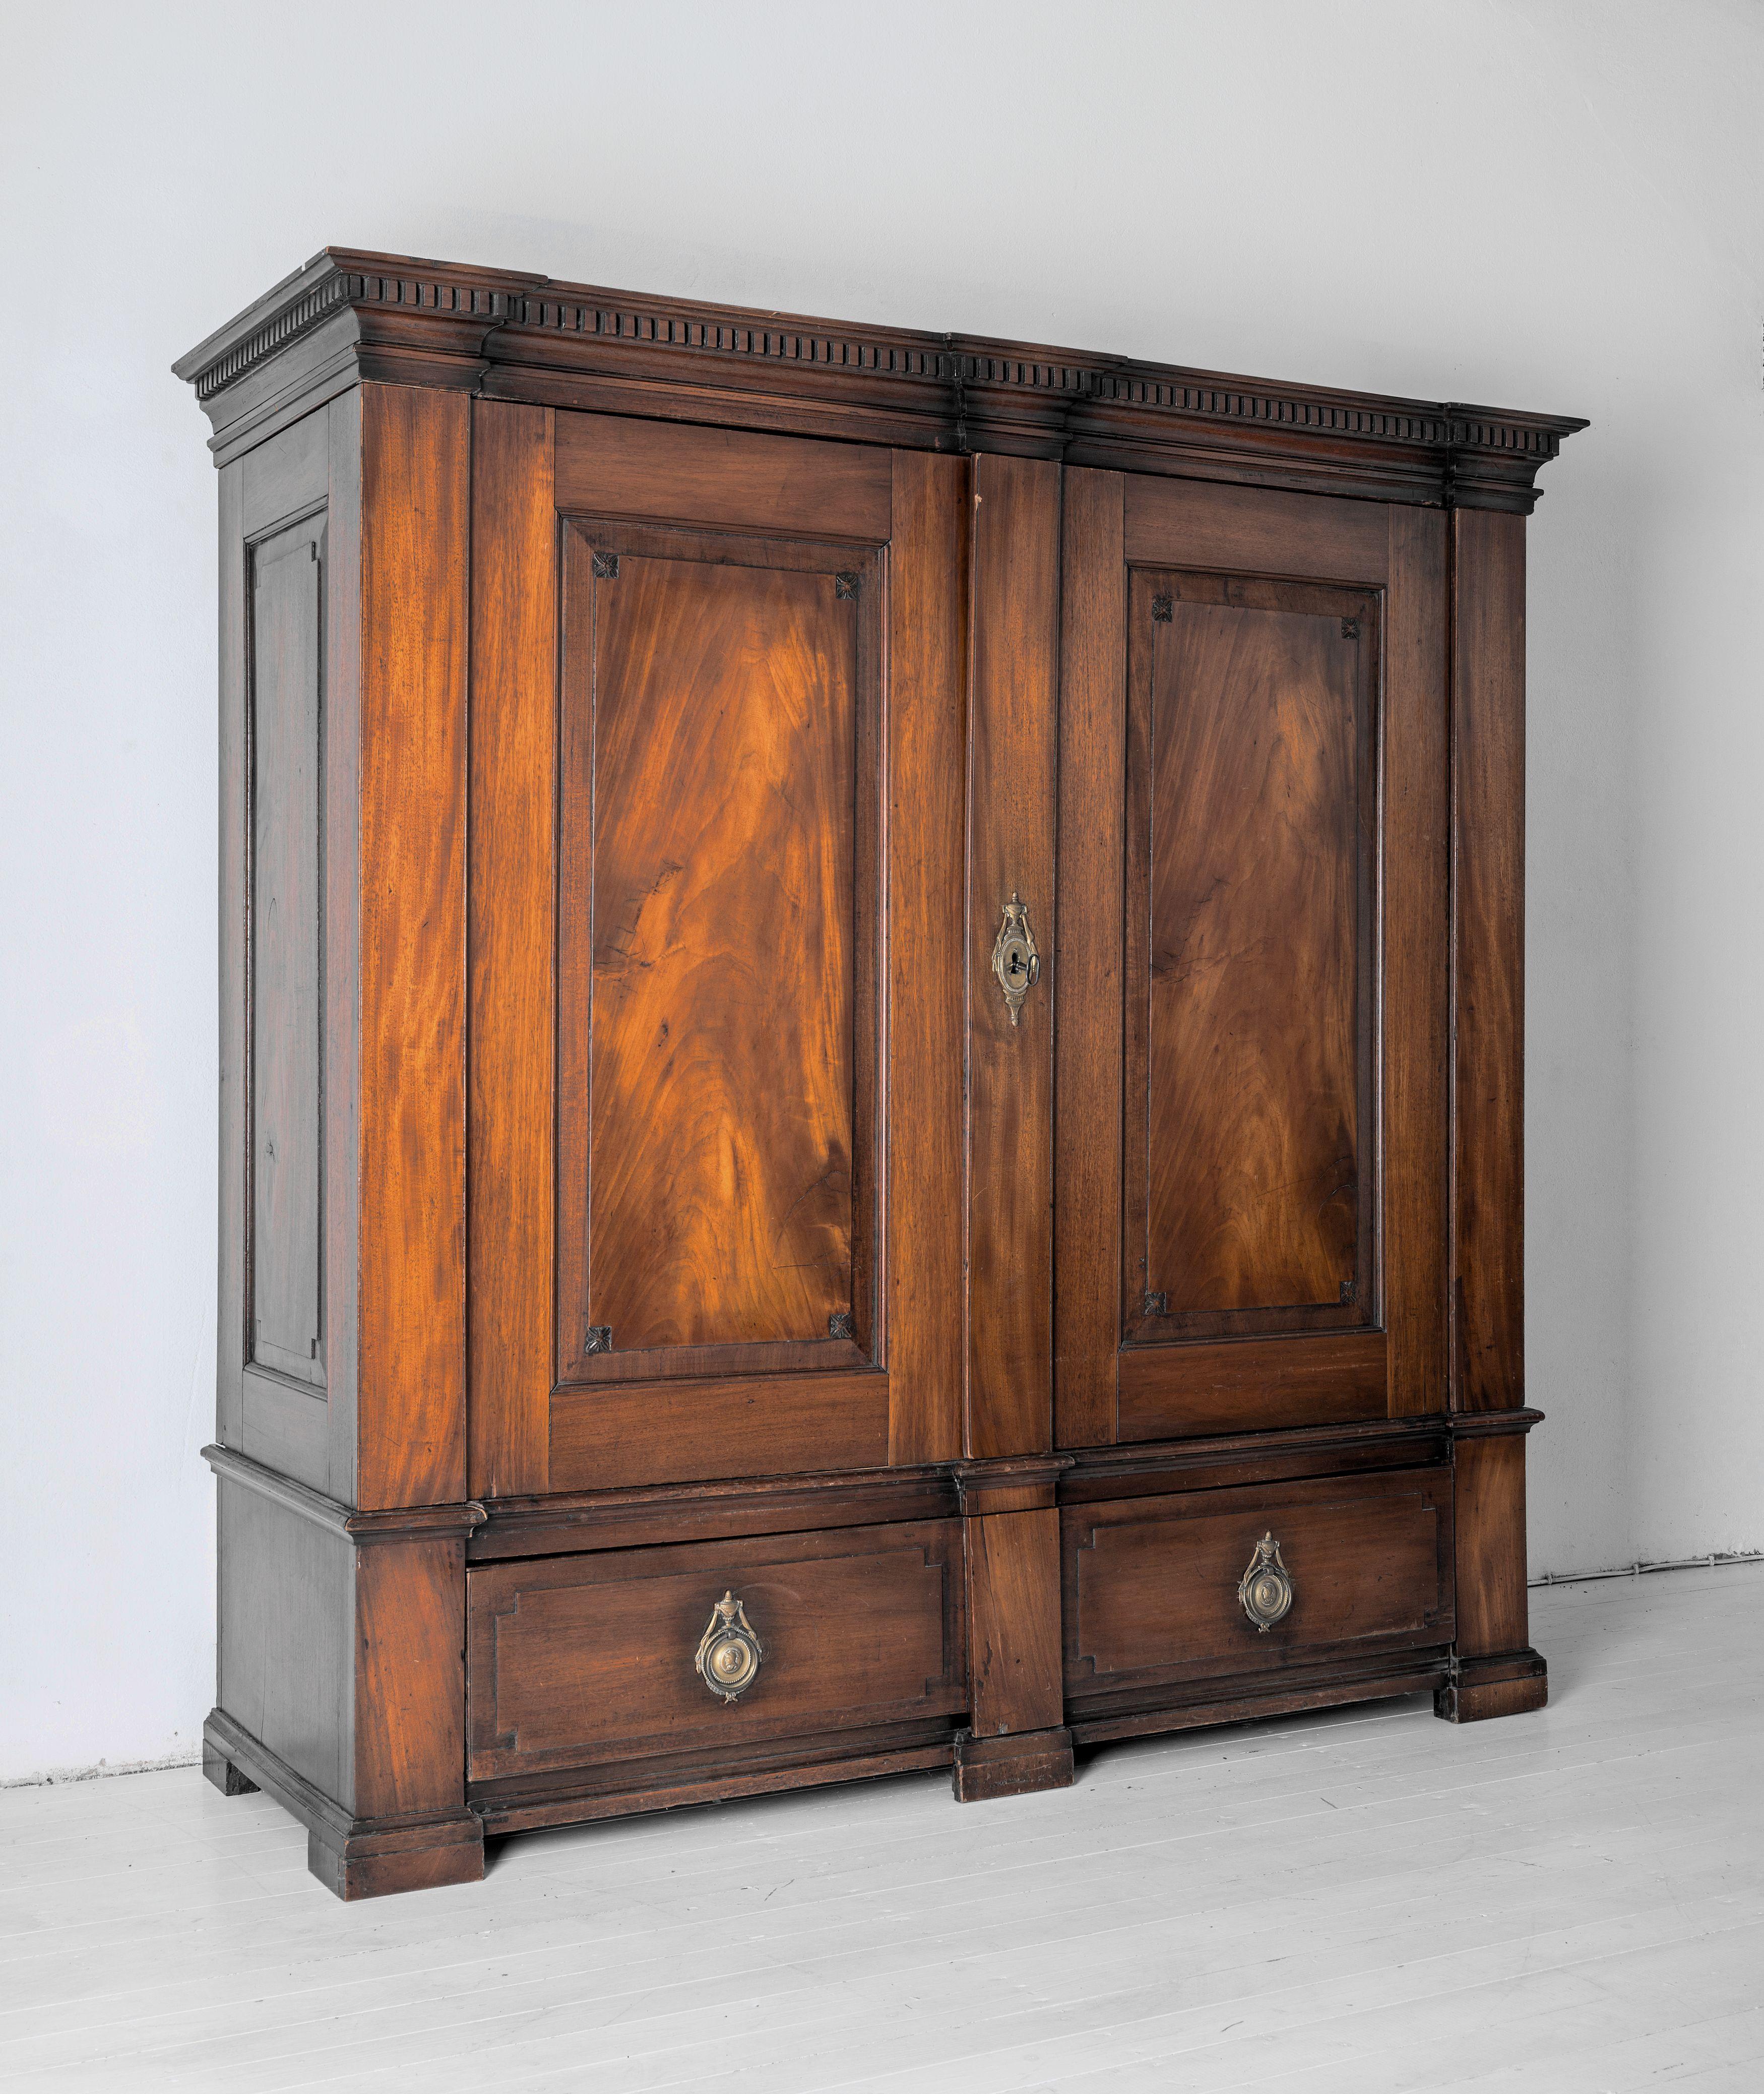 Polished Large Simple Neoclassical Danish Mahogany Armoire, ca 1790 For Sale